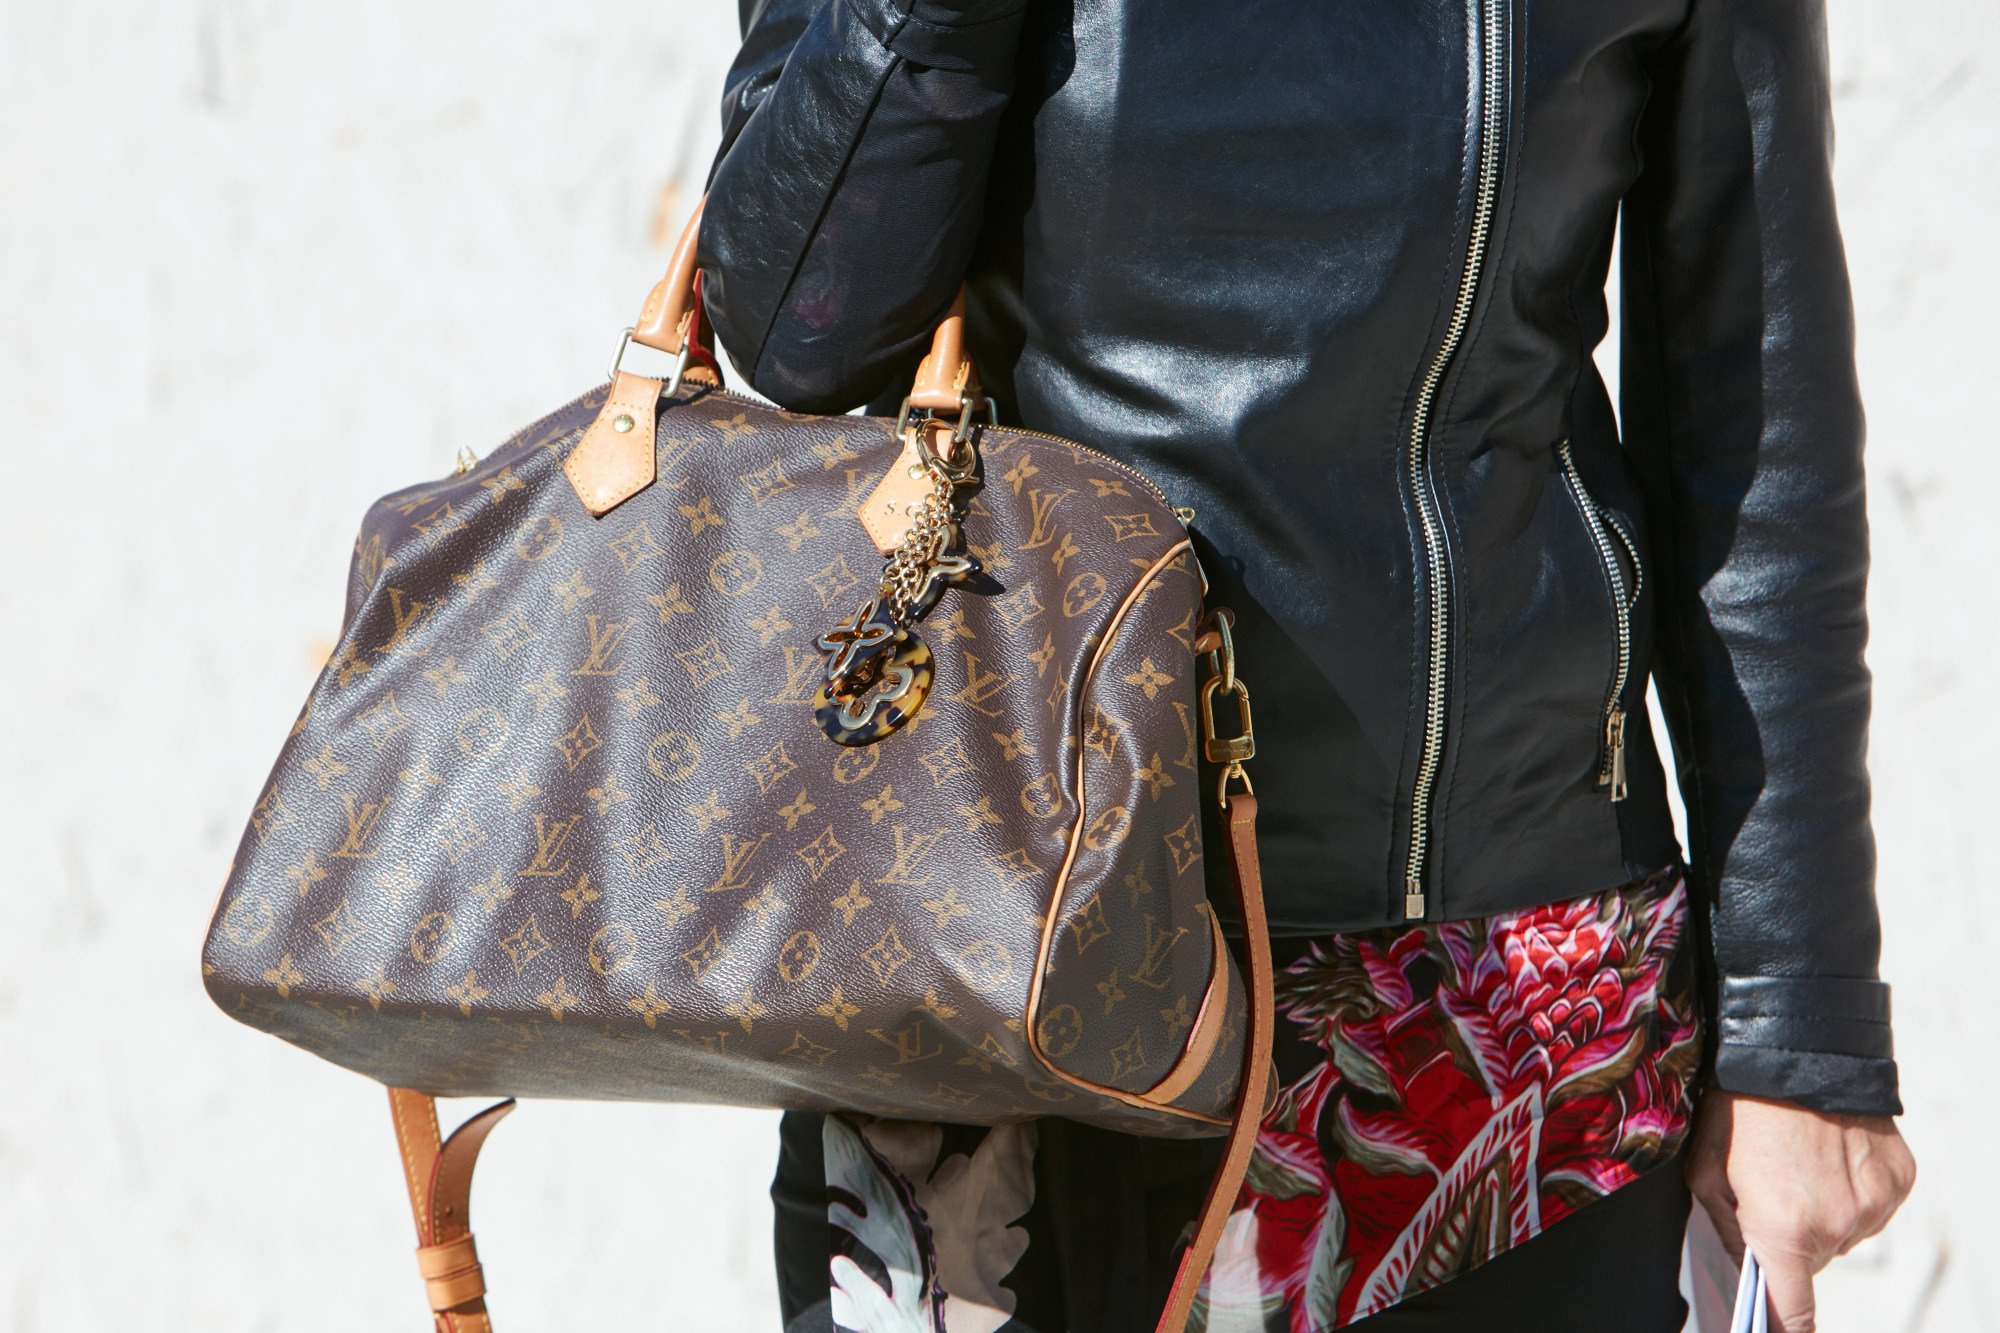 Louis Vuitton Confirms Worldwide Price Increases, Citing Rising